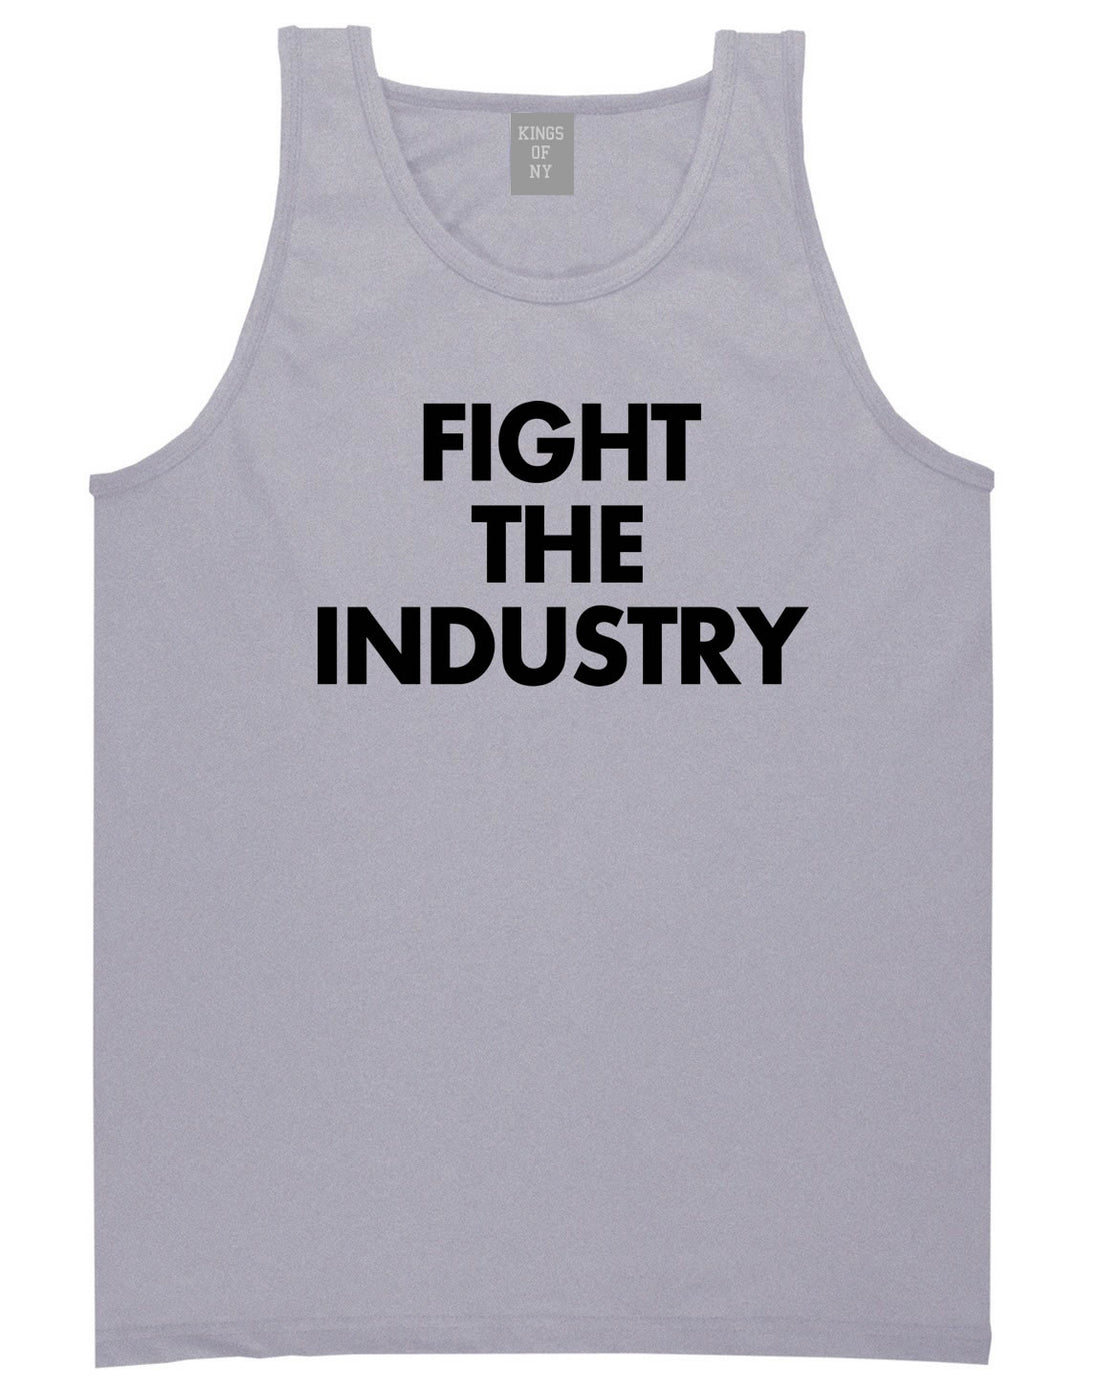 Fight The Industry Power Tank Top in Grey By Kings Of NY